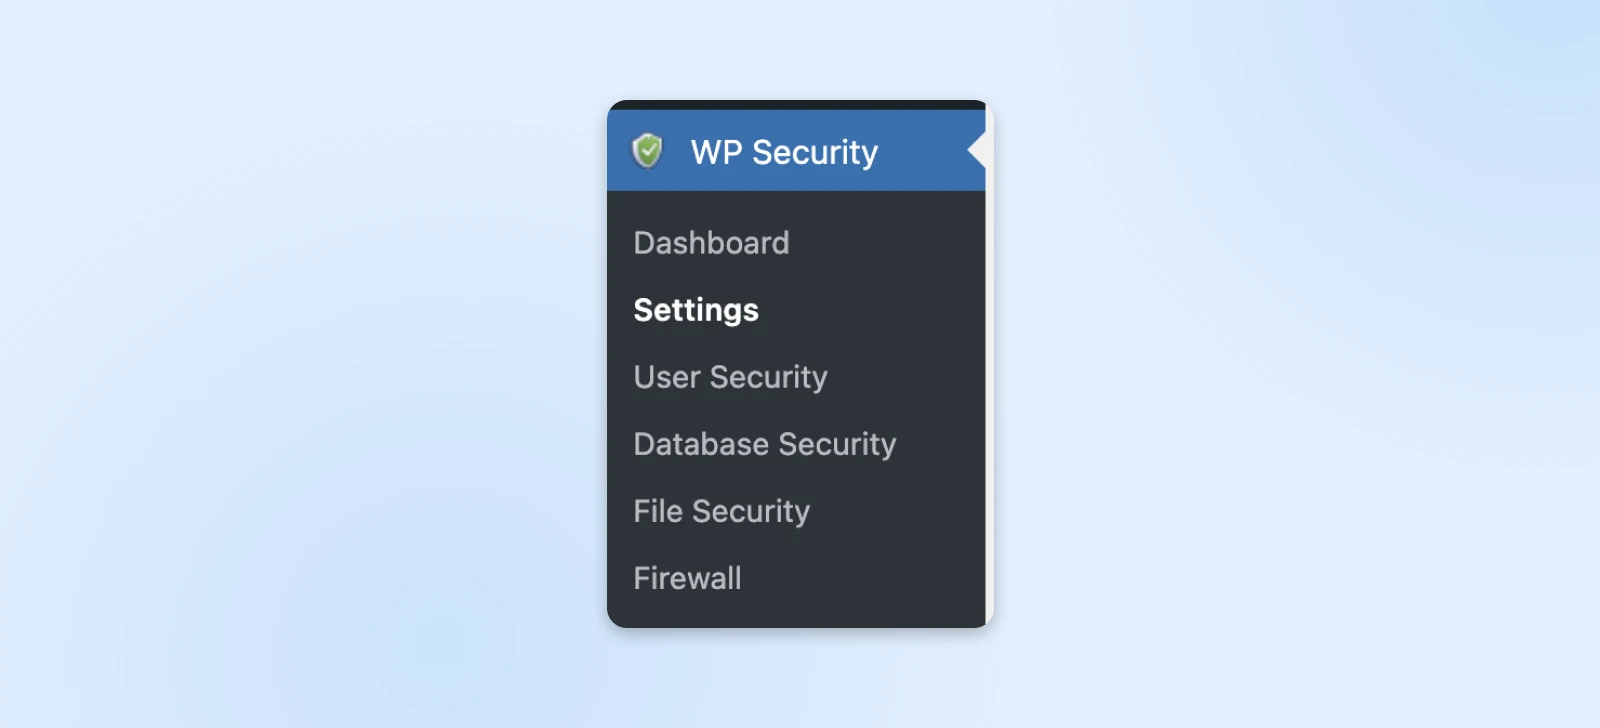 The WP Security menu is shown. The second option, 'Settings,' is highlighted